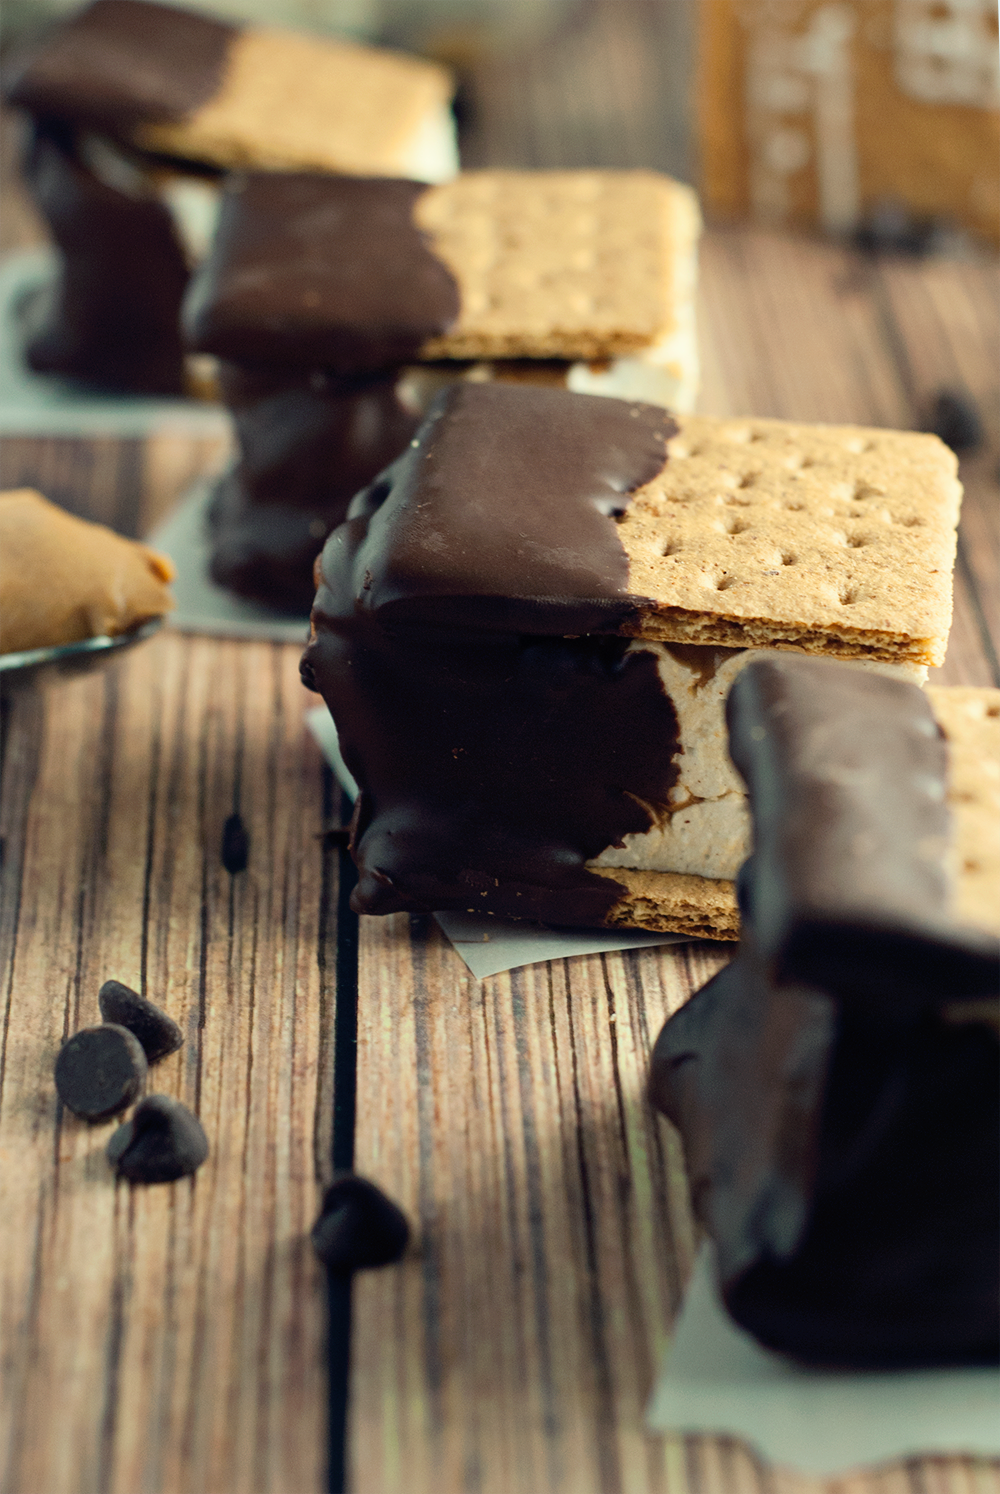 These chocolate peanut butter smores are sure to blow your mind with massive, fluffy, homemade marshmallows between crisp graham crackers, dripped in rich chocolate!